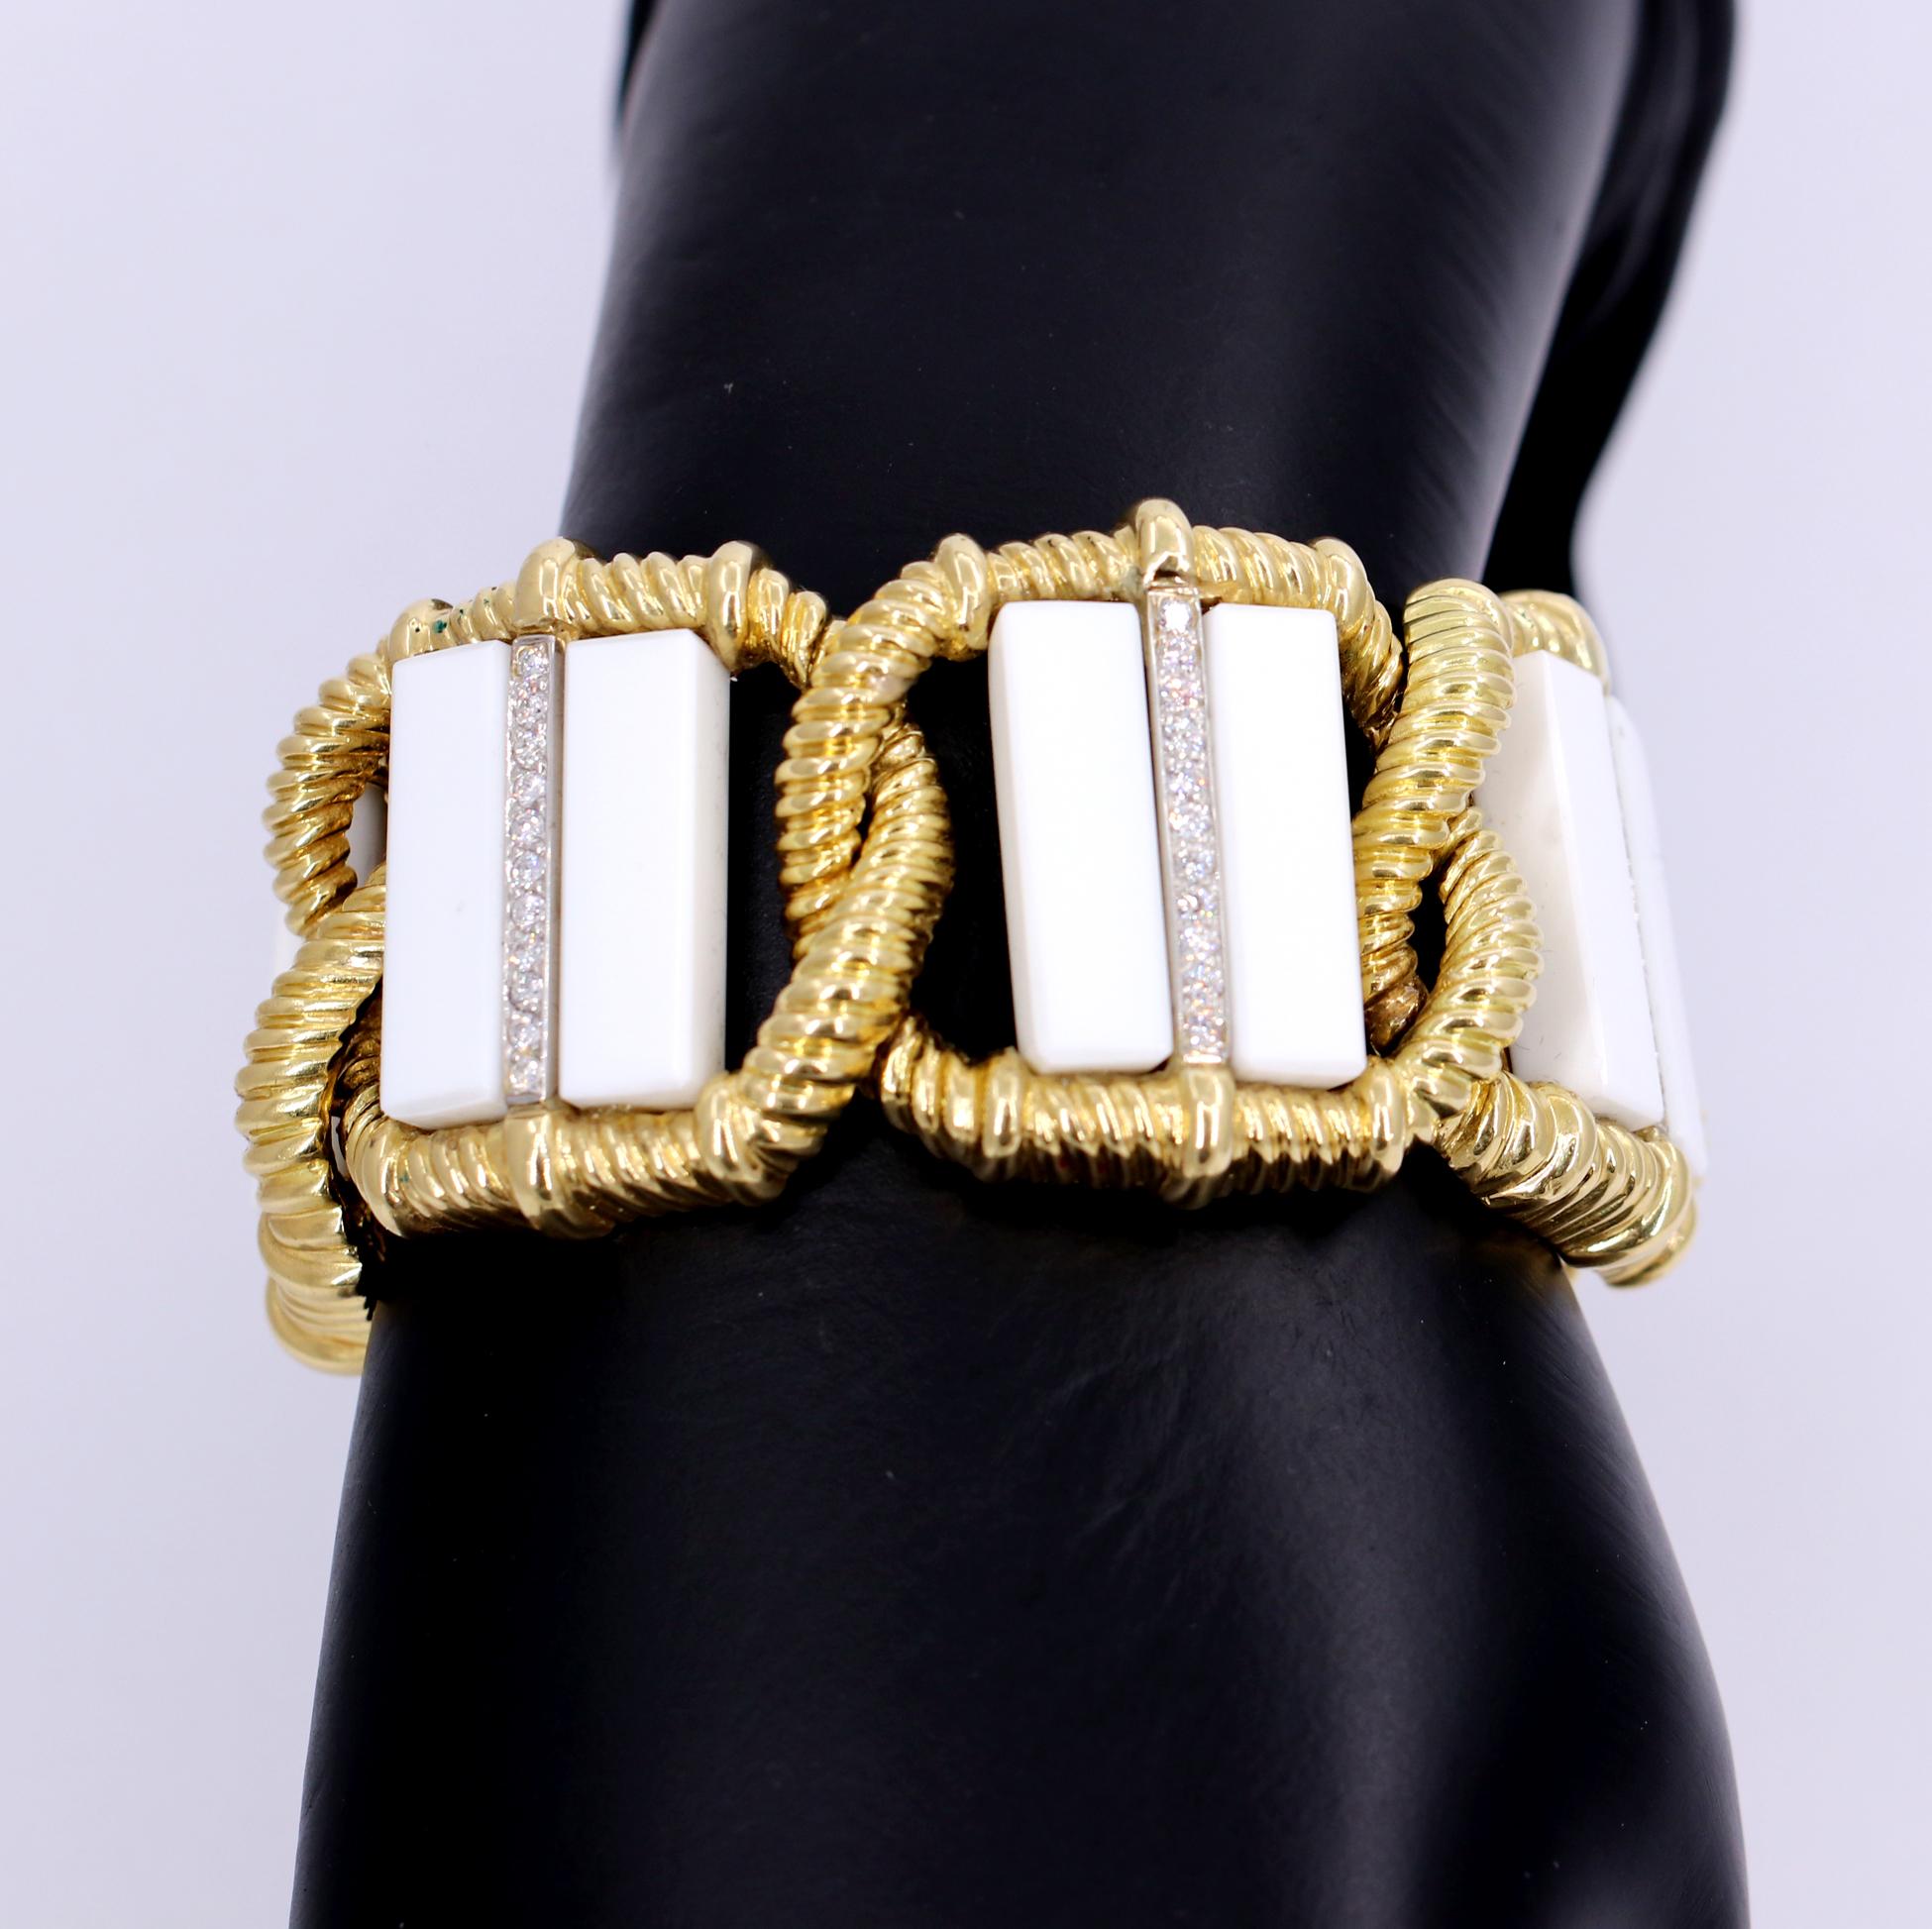 An 18 karat yellow gold bracelet measuring 1 7/16 inches wide, comprised of 6 interlocking twisted rope links, each set with two slabs of white onyx. Each link also features a strip of 11 round brilliant cut diamonds set in platinum. Diamonds weigh